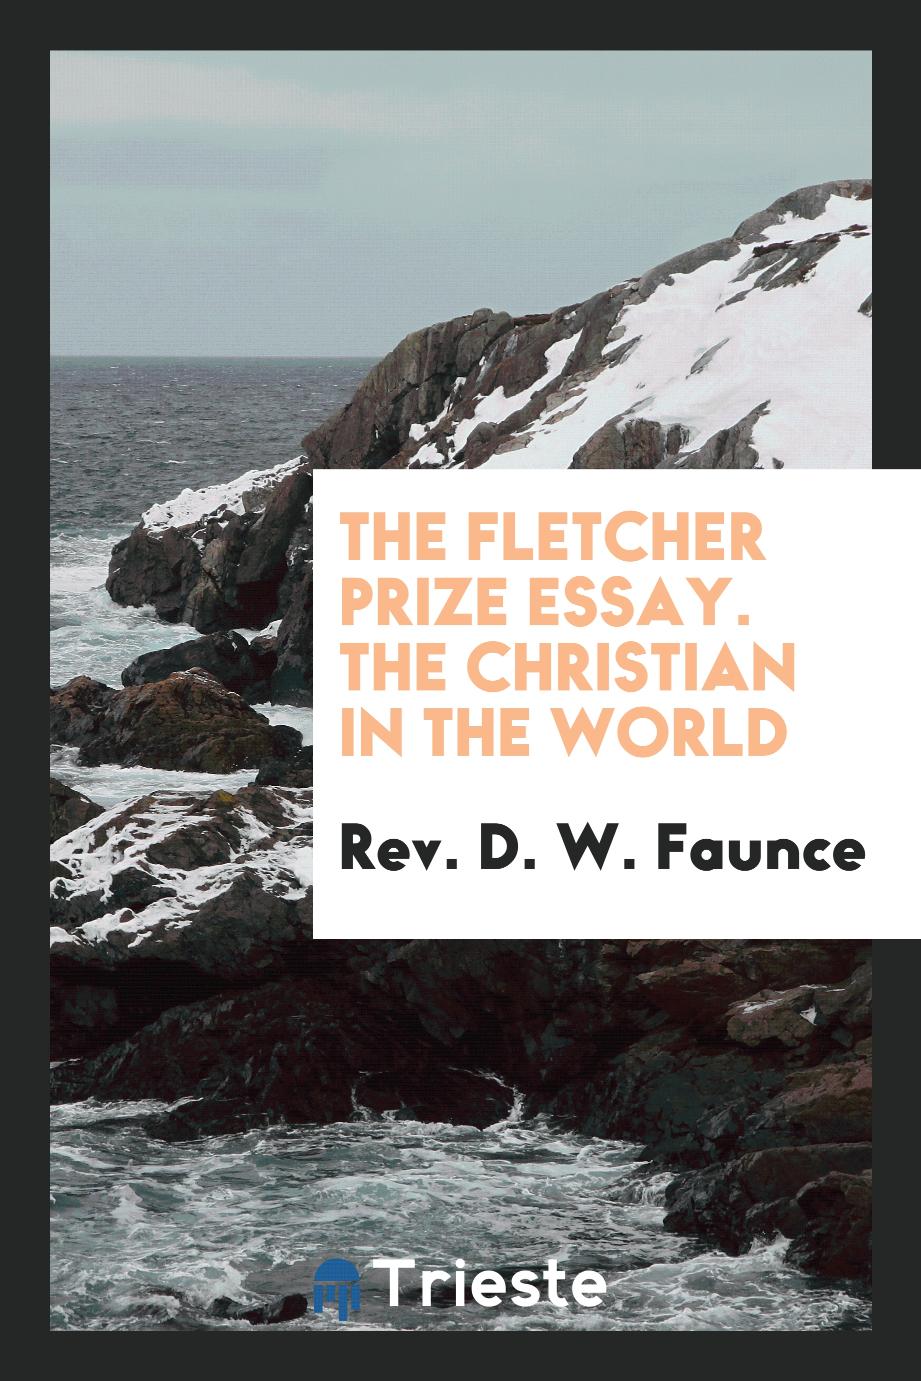 The Fletcher Prize Essay. The Christian in the World